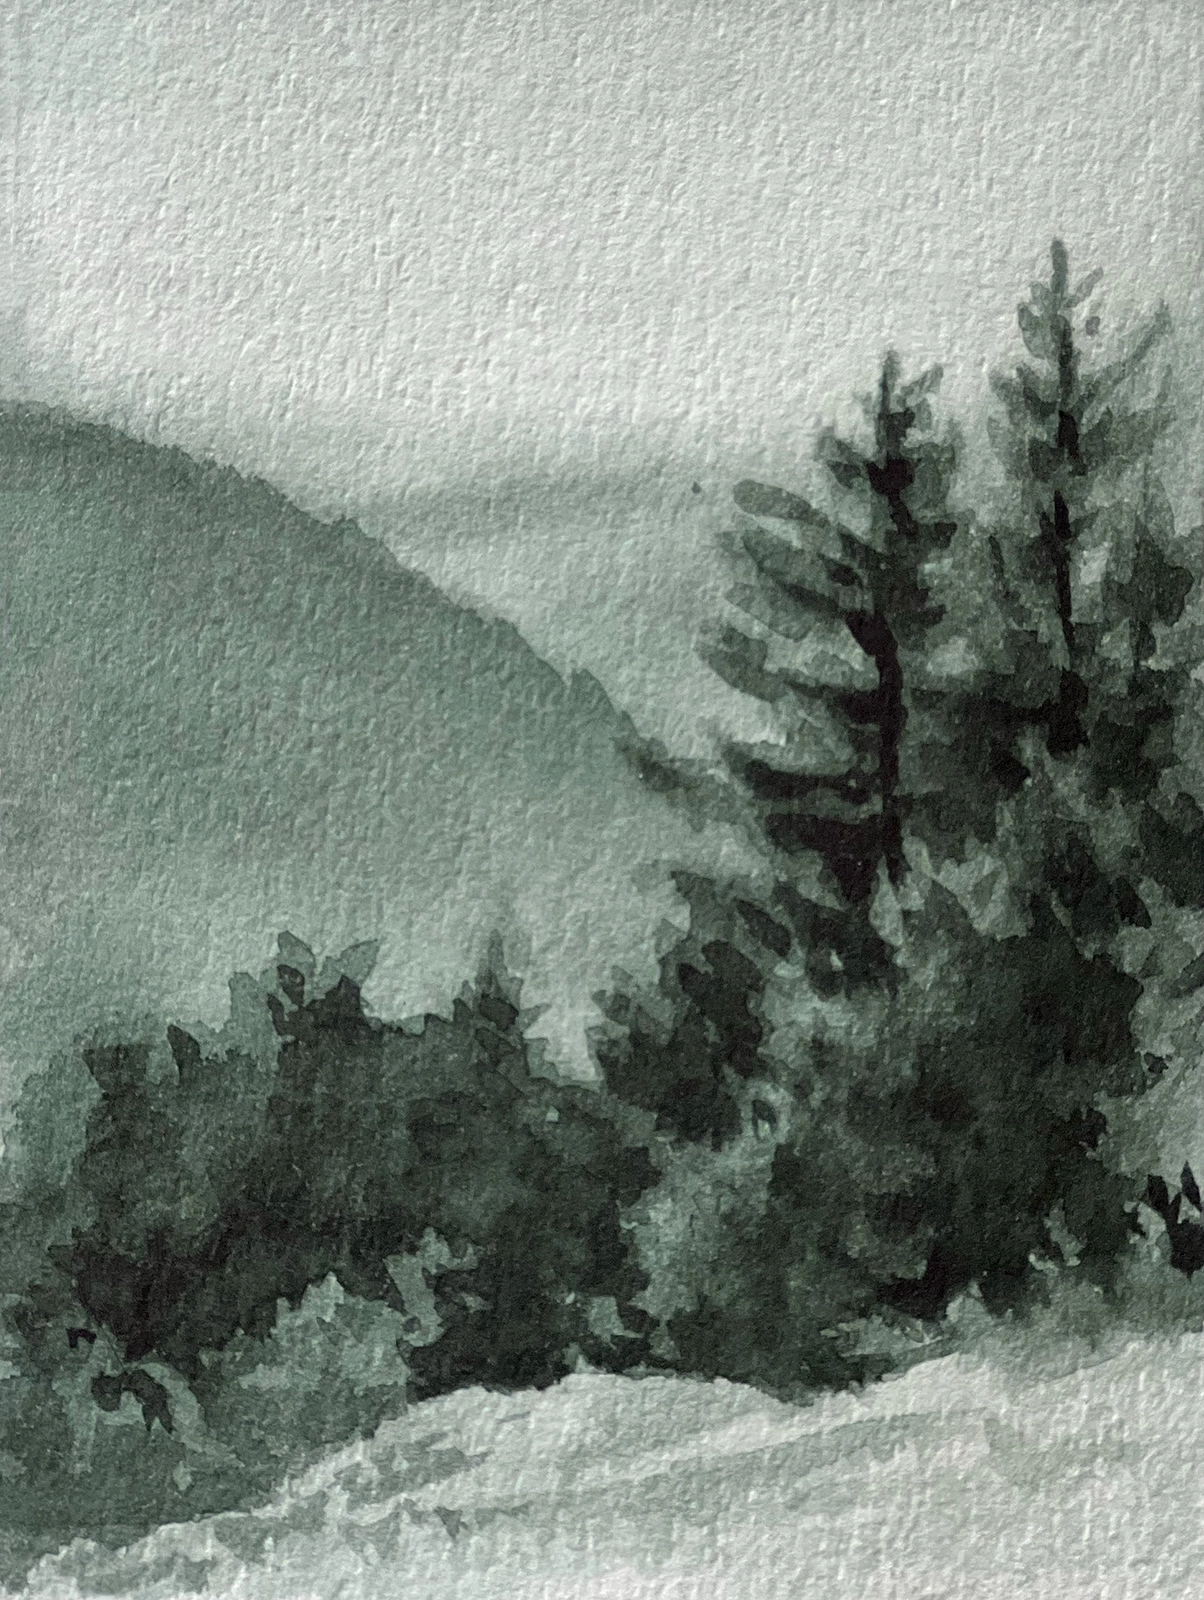 A watercolor painting by Jill Gustavis titled 'Celadon Watercolor Landscape.' The artwork depicts a serene, mountainous landscape with trees in the foreground and rolling hills fading into the background. The entire scene is rendered in soft, muted green tones, creating a tranquil and misty atmosphere.